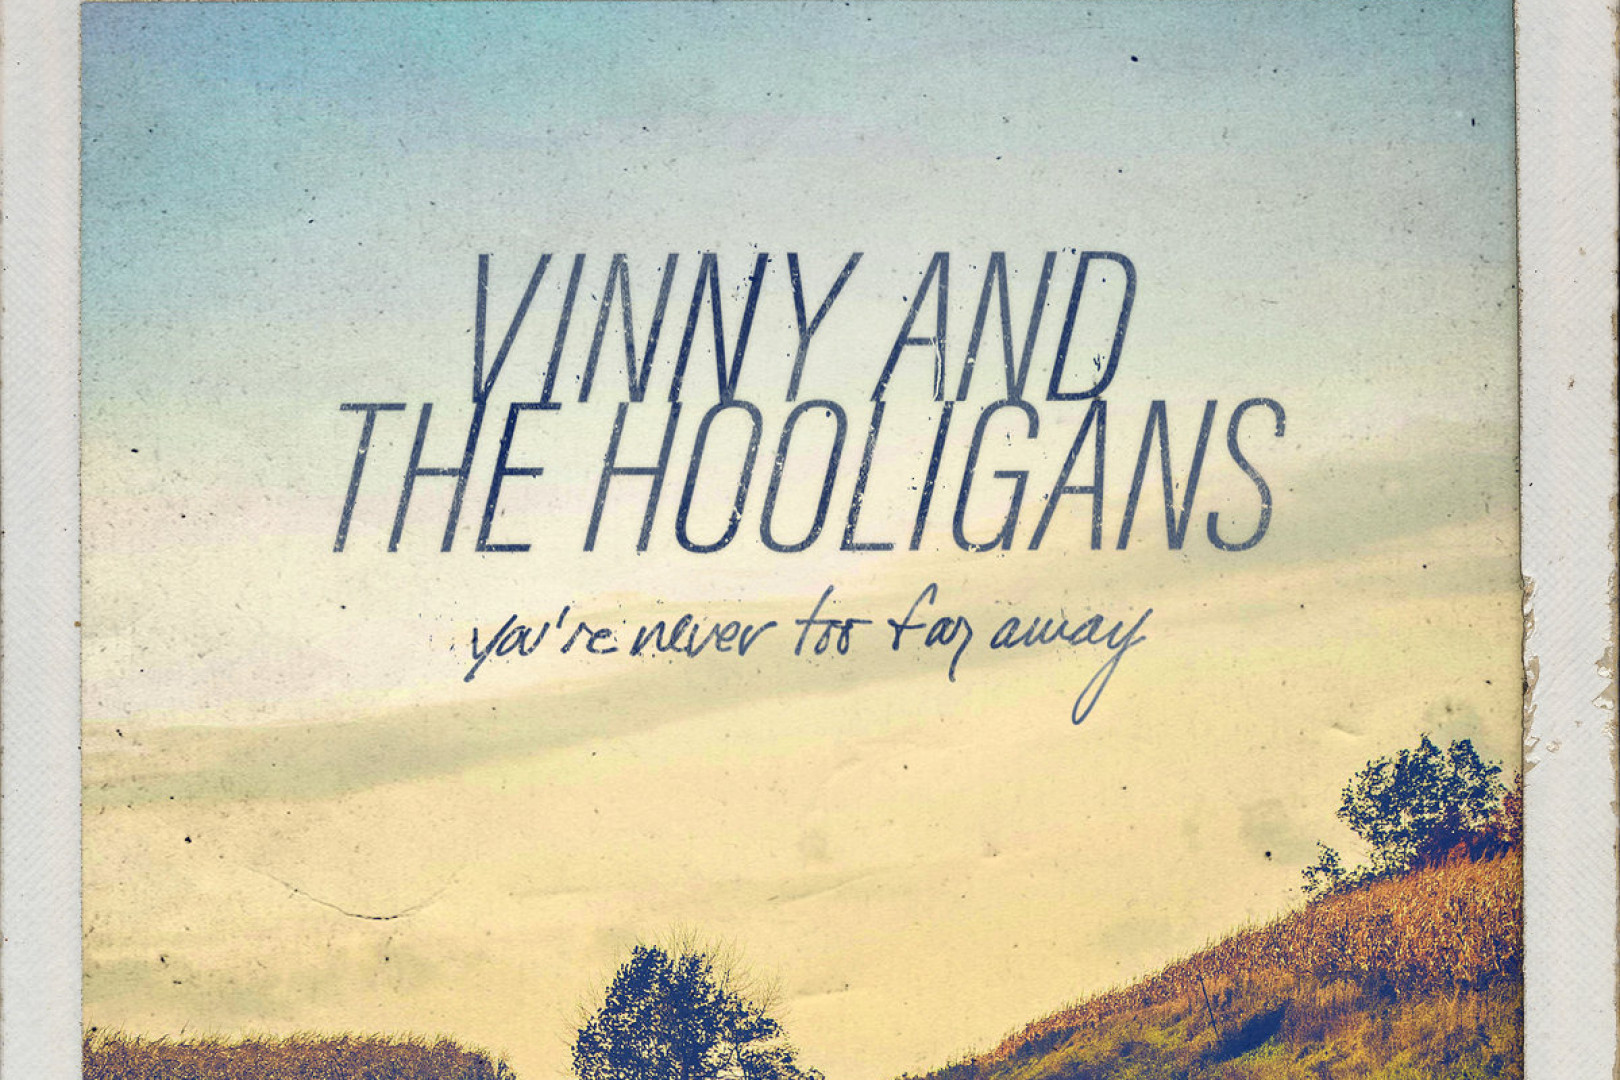 Vinny and The Hooligans: 'You're Never Too Far Away'